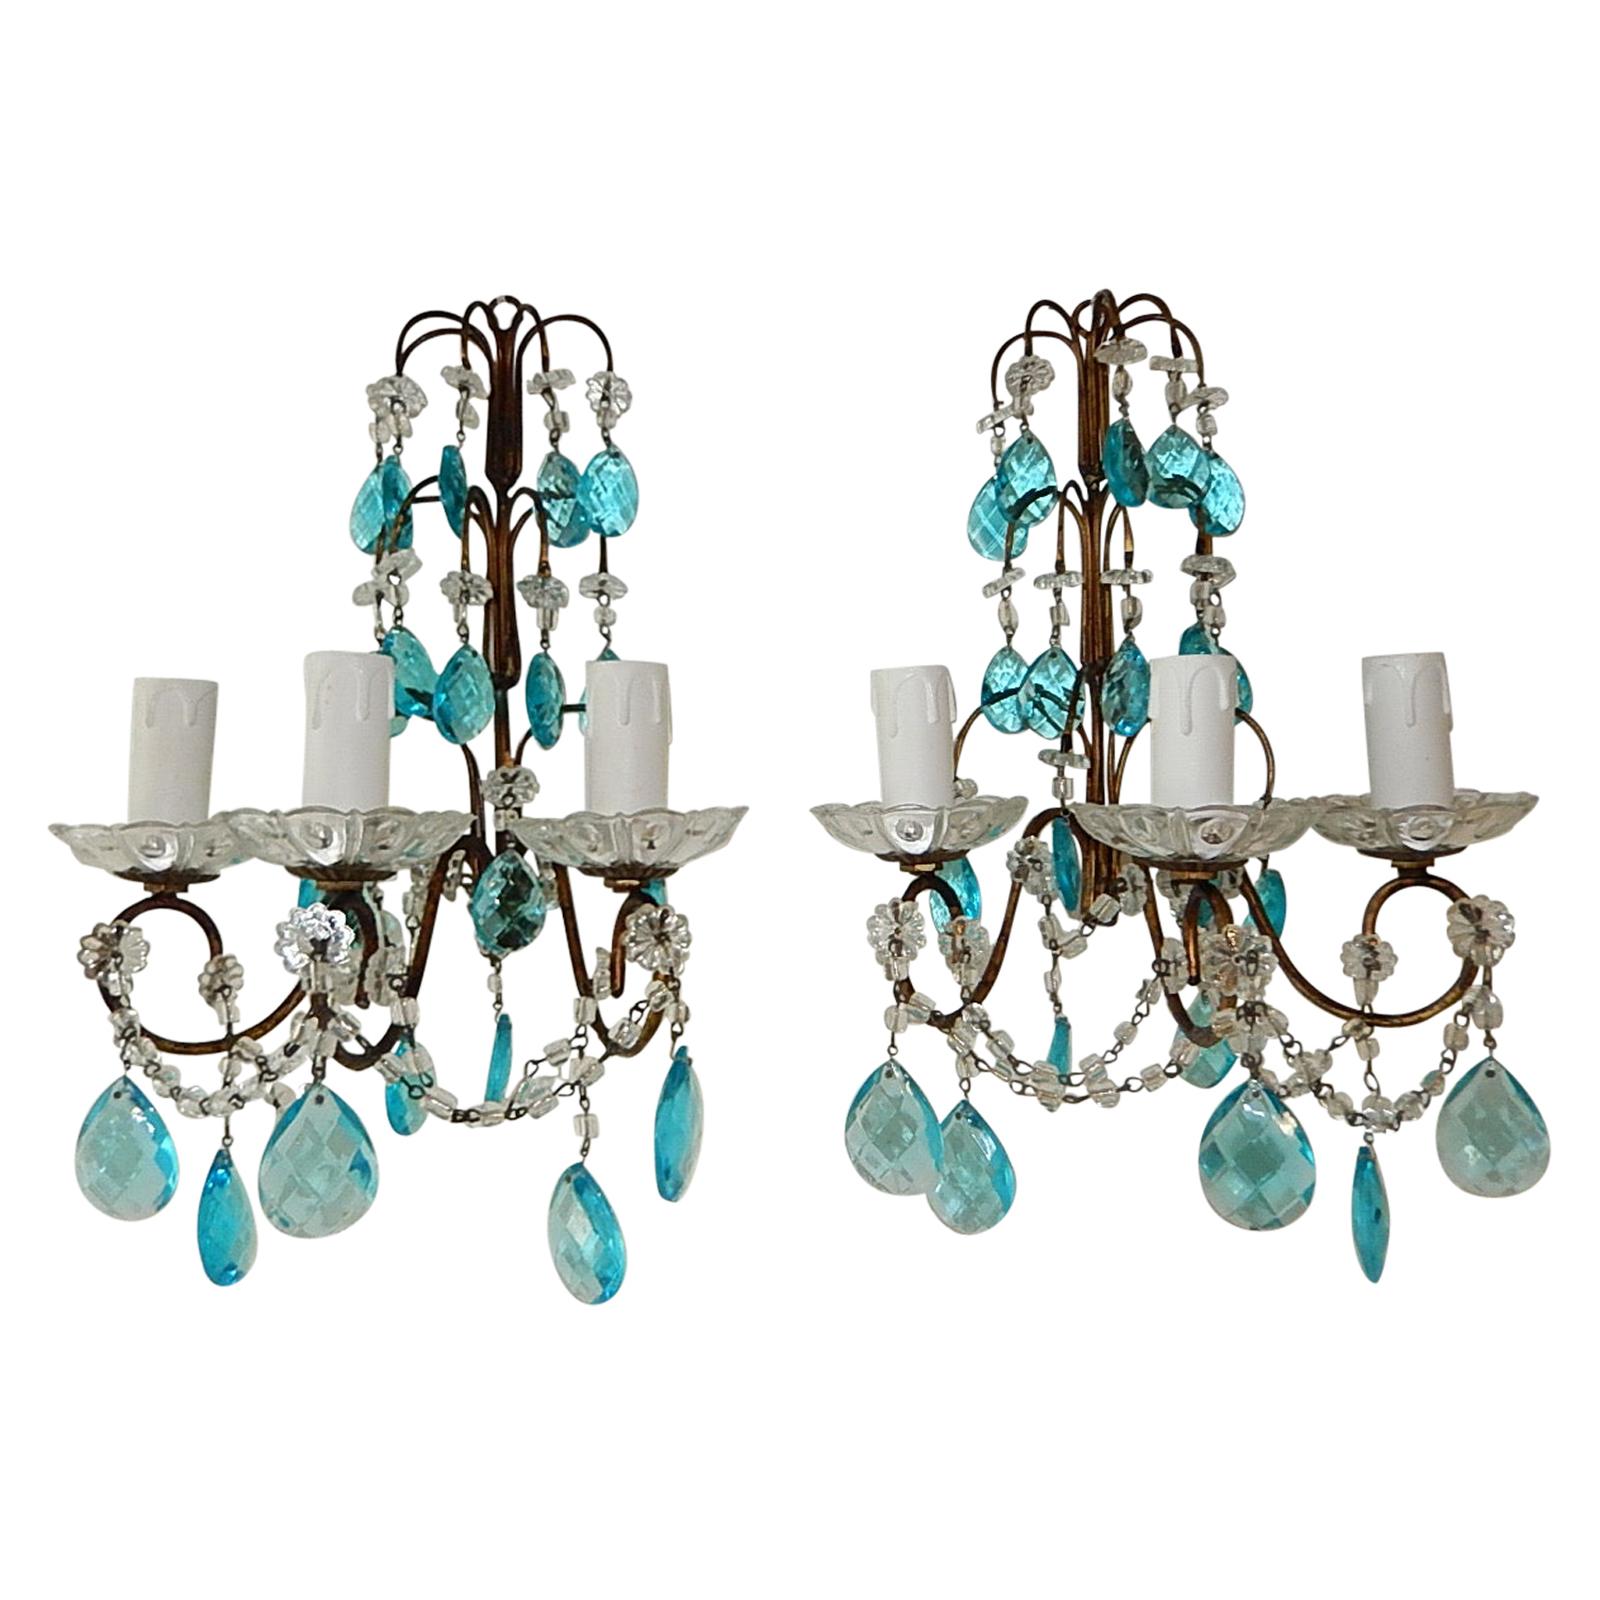 1920 French Aqua Blue Crystal Prisms and Swags Sconces